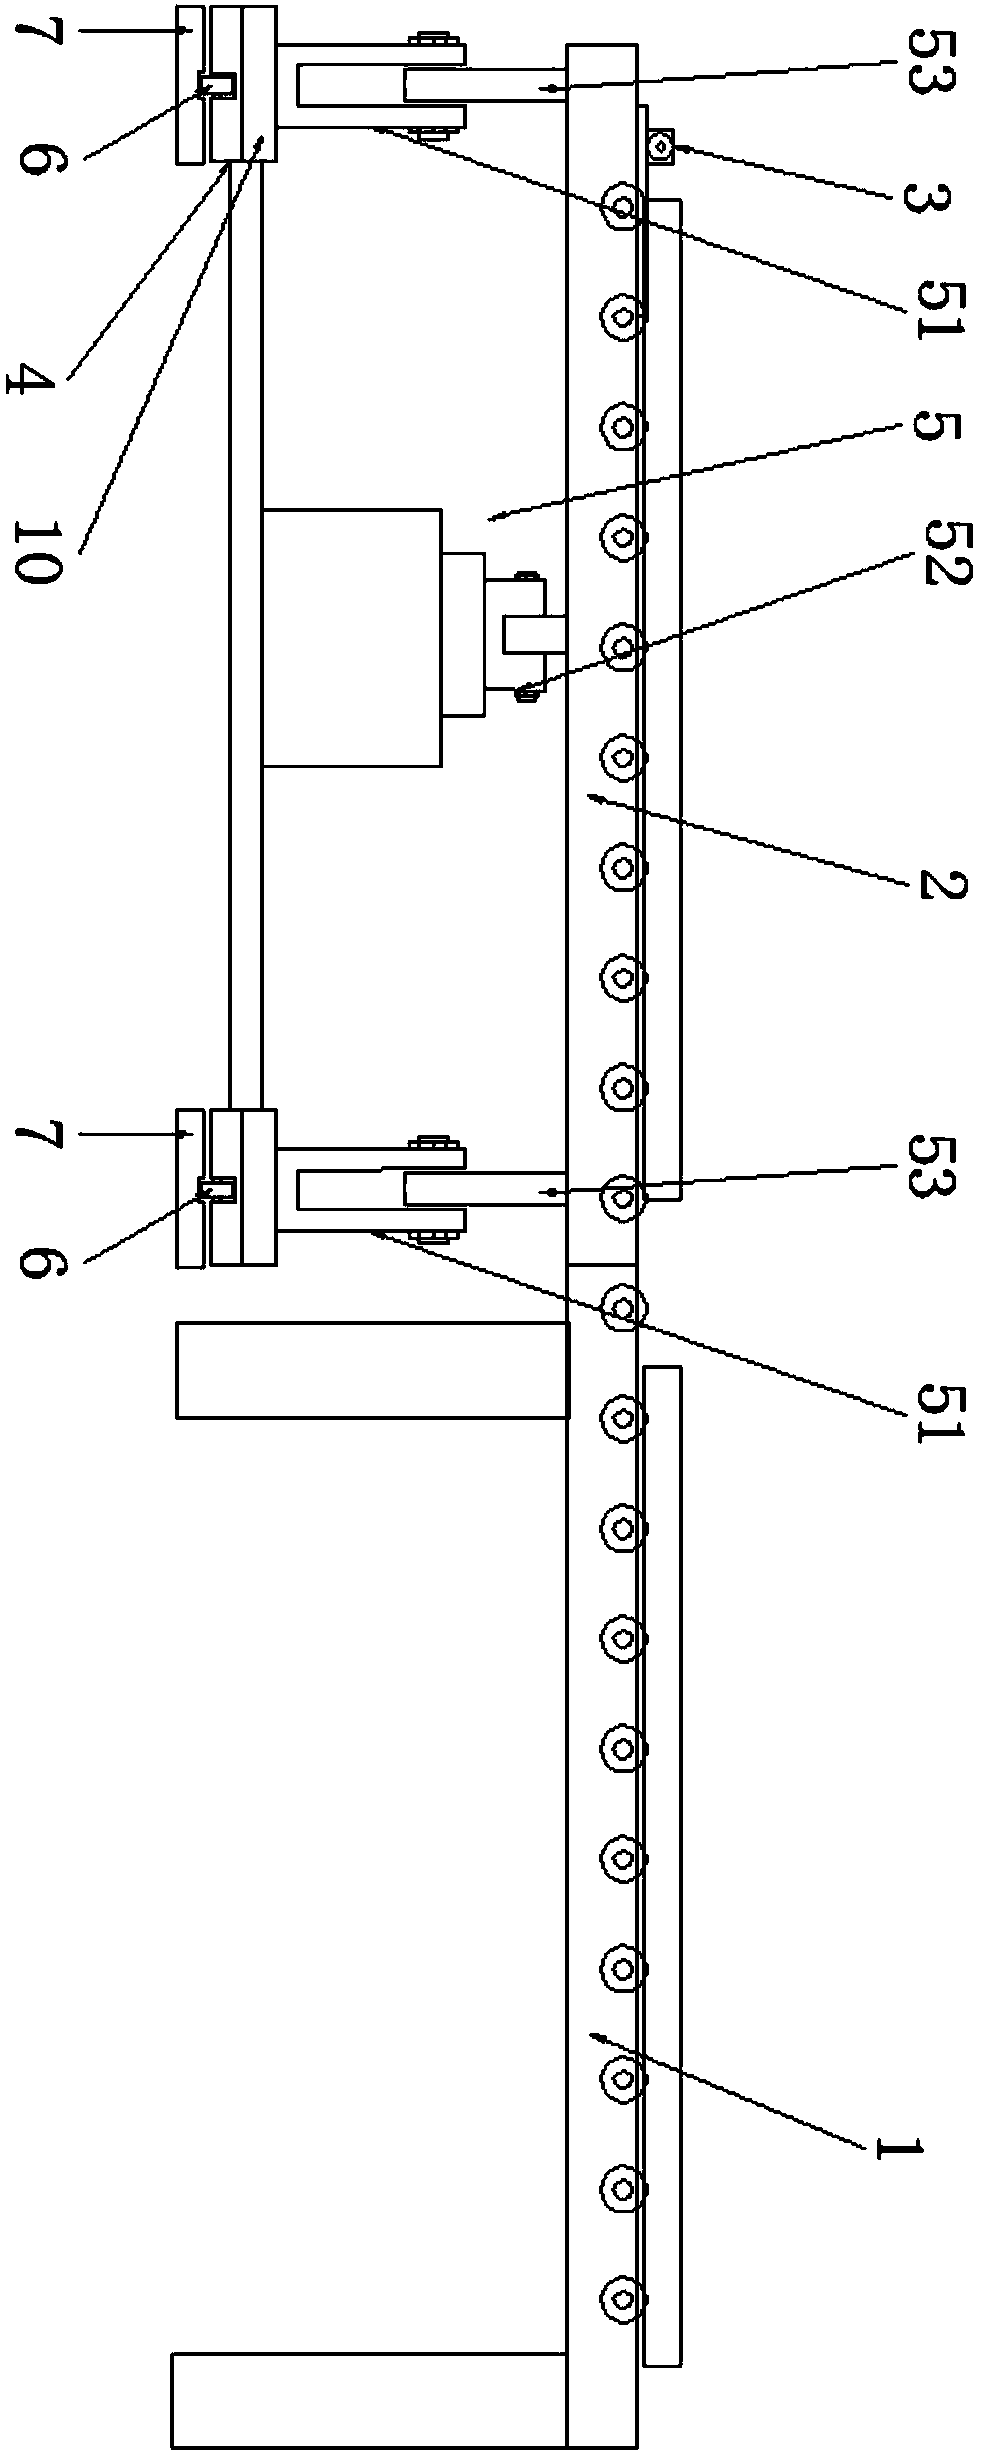 Slate conveying device